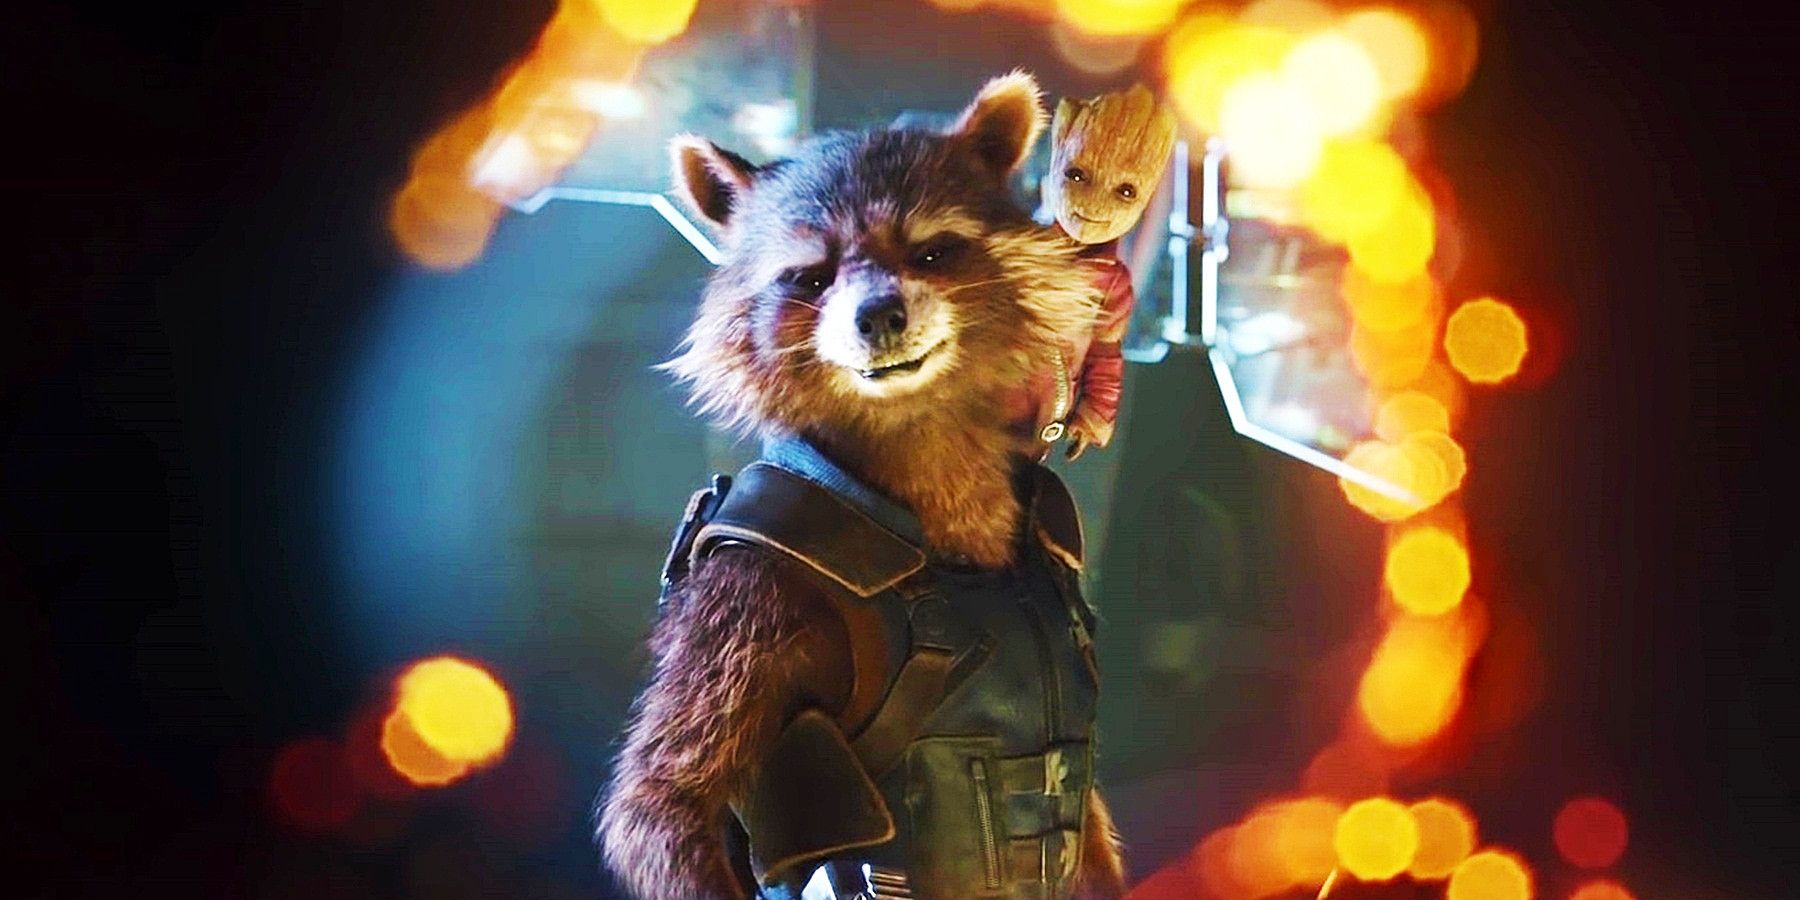 Rocket Raccoon and Groot are smiling while looking through a hole blasted into a wall.